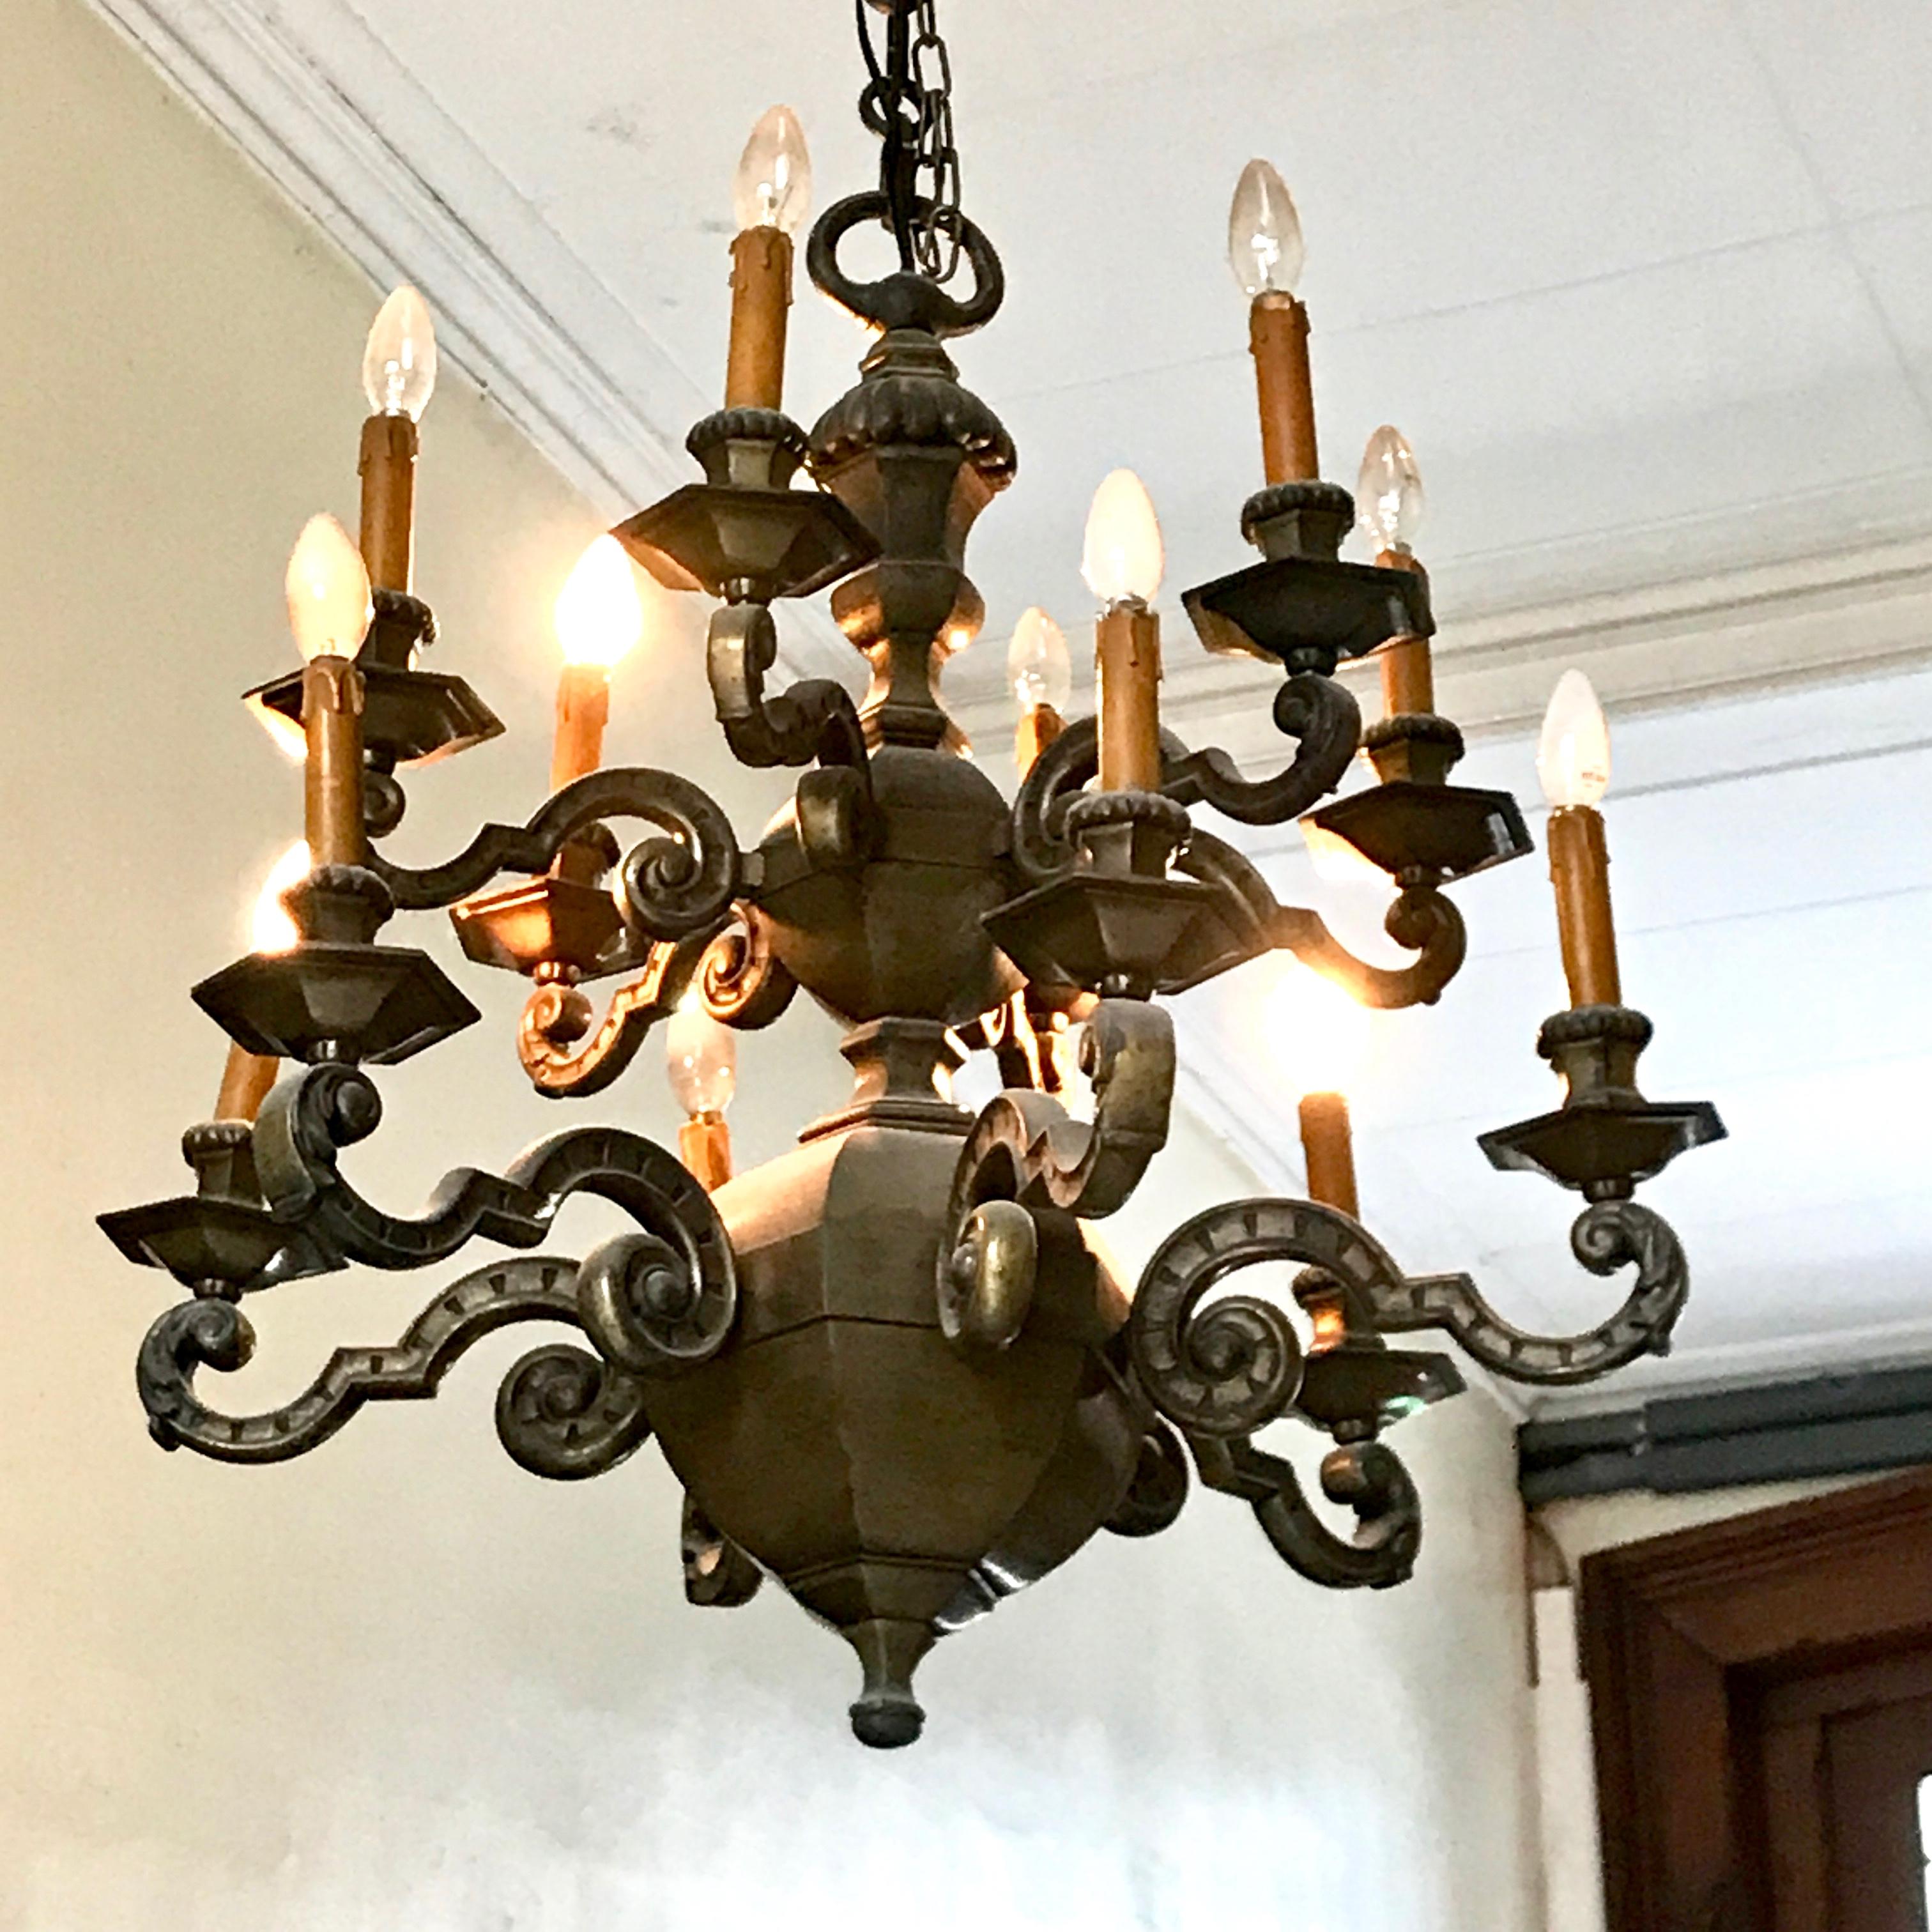 French circa 1900 two-tier cast bronze chandelier with 12 arms. Beautiful sculptural shape consisting of a large hexagonal ball on the bottom, a smaller hexagonal ball above and topped with an urn. Fine attention to the design details such as the